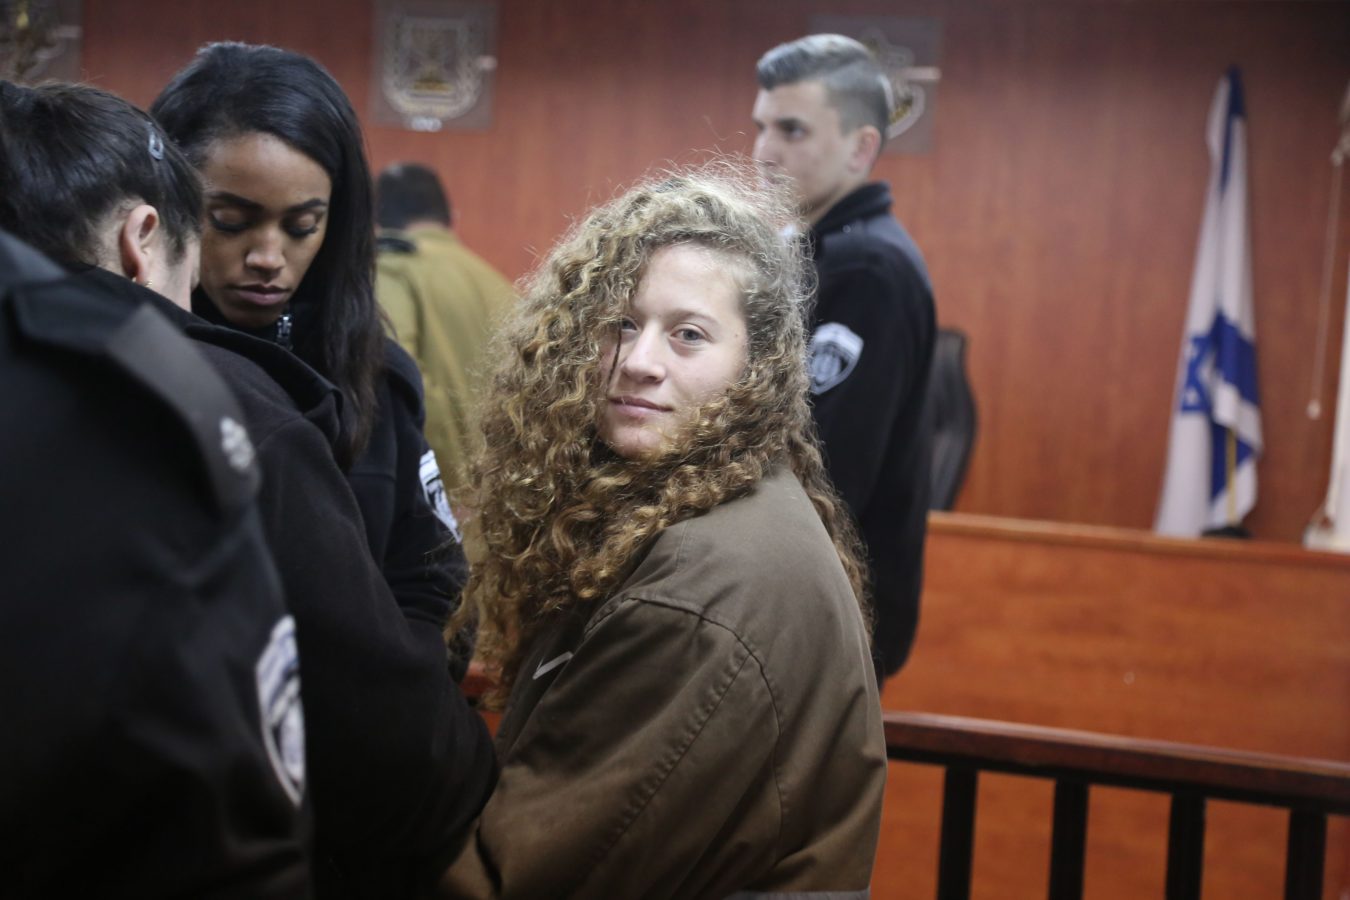 16-year-old Palestinian Ahed al-Tamimi appears in court after she was taken into custody by Israeli soldiers. © Issam Rimawi/Anadolu Agency/Getty Images